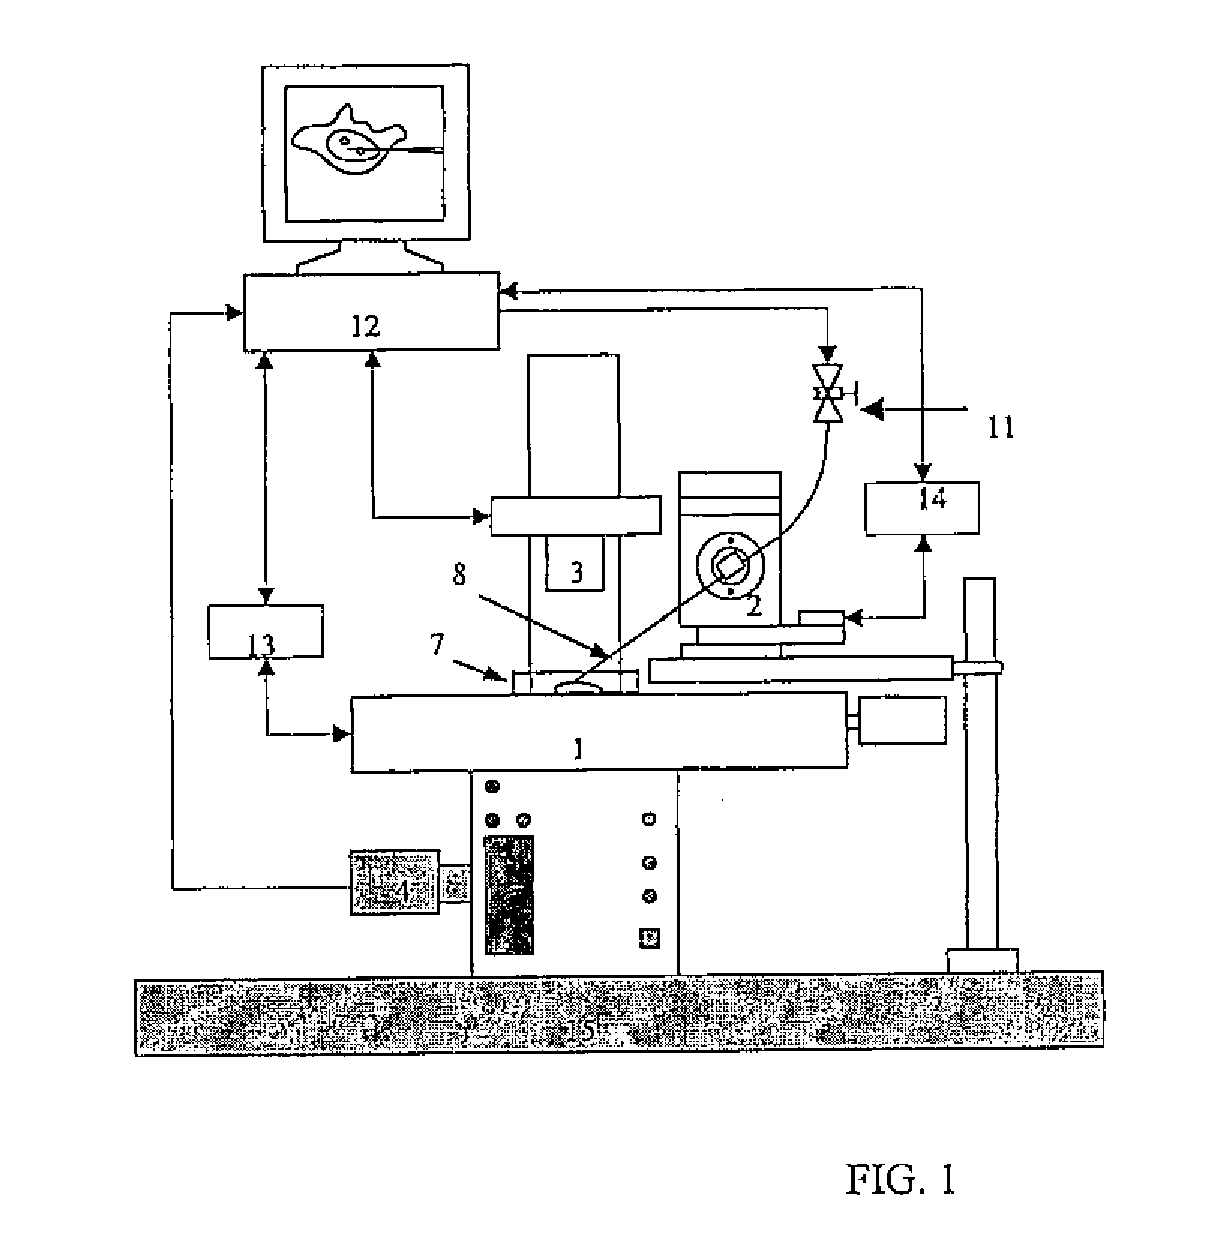 System and method for micromanipulating samples